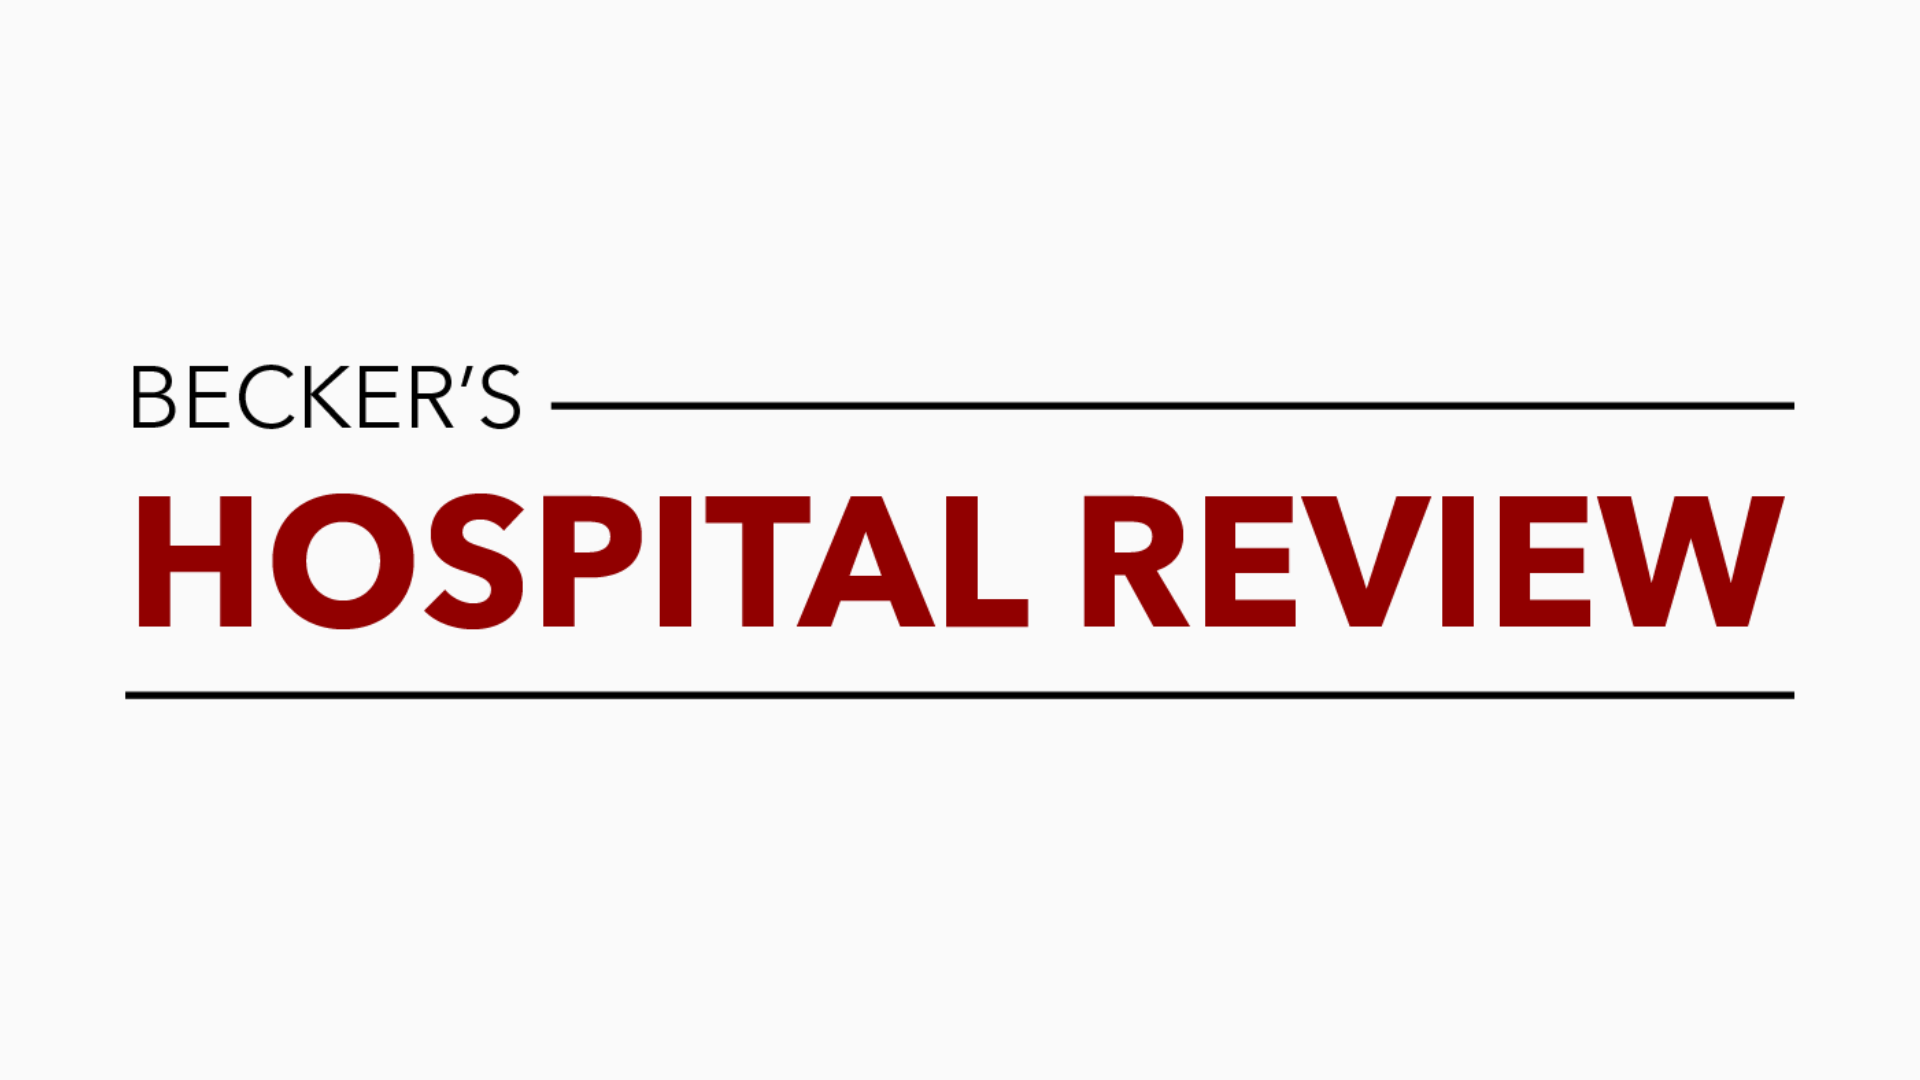 Becker's hospital review graphic